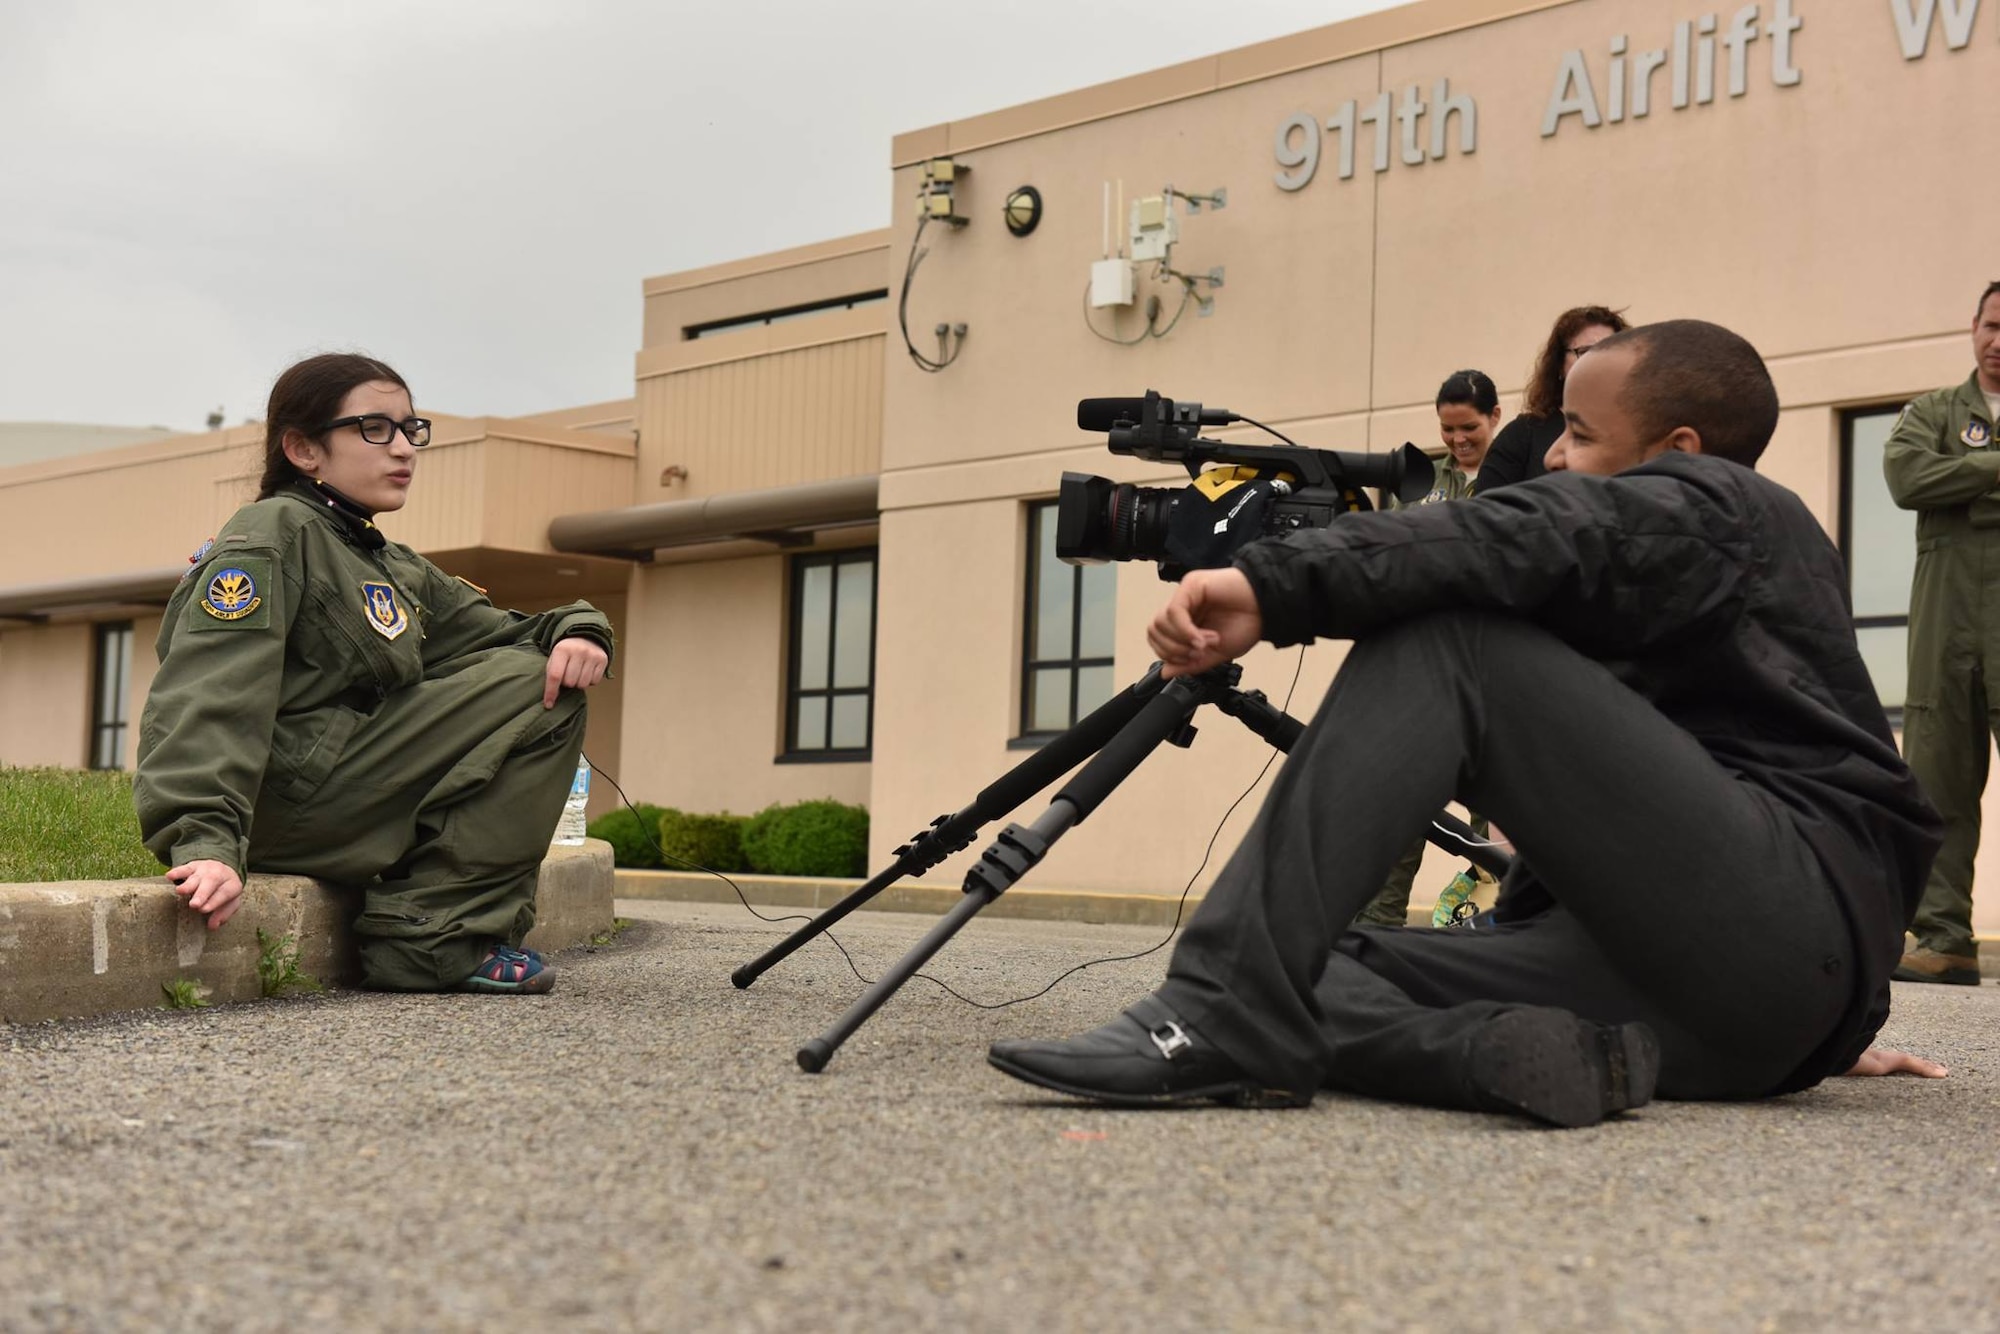 12 year-old Norah Carter, honorary second lieutenant of the 911th Airlift Wing, is interviewed by a reporter with WPXI-TV at the Pittsburgh International Air Reserve Station, May 11, 2016. Norah was nominated for the Pilot for a Day program by her doctors with the Allegheny Health Network, where she is being treated for an undiagnosed genetic disorder. (U.S. Air Force photo by Airman Bethany Feenstra)